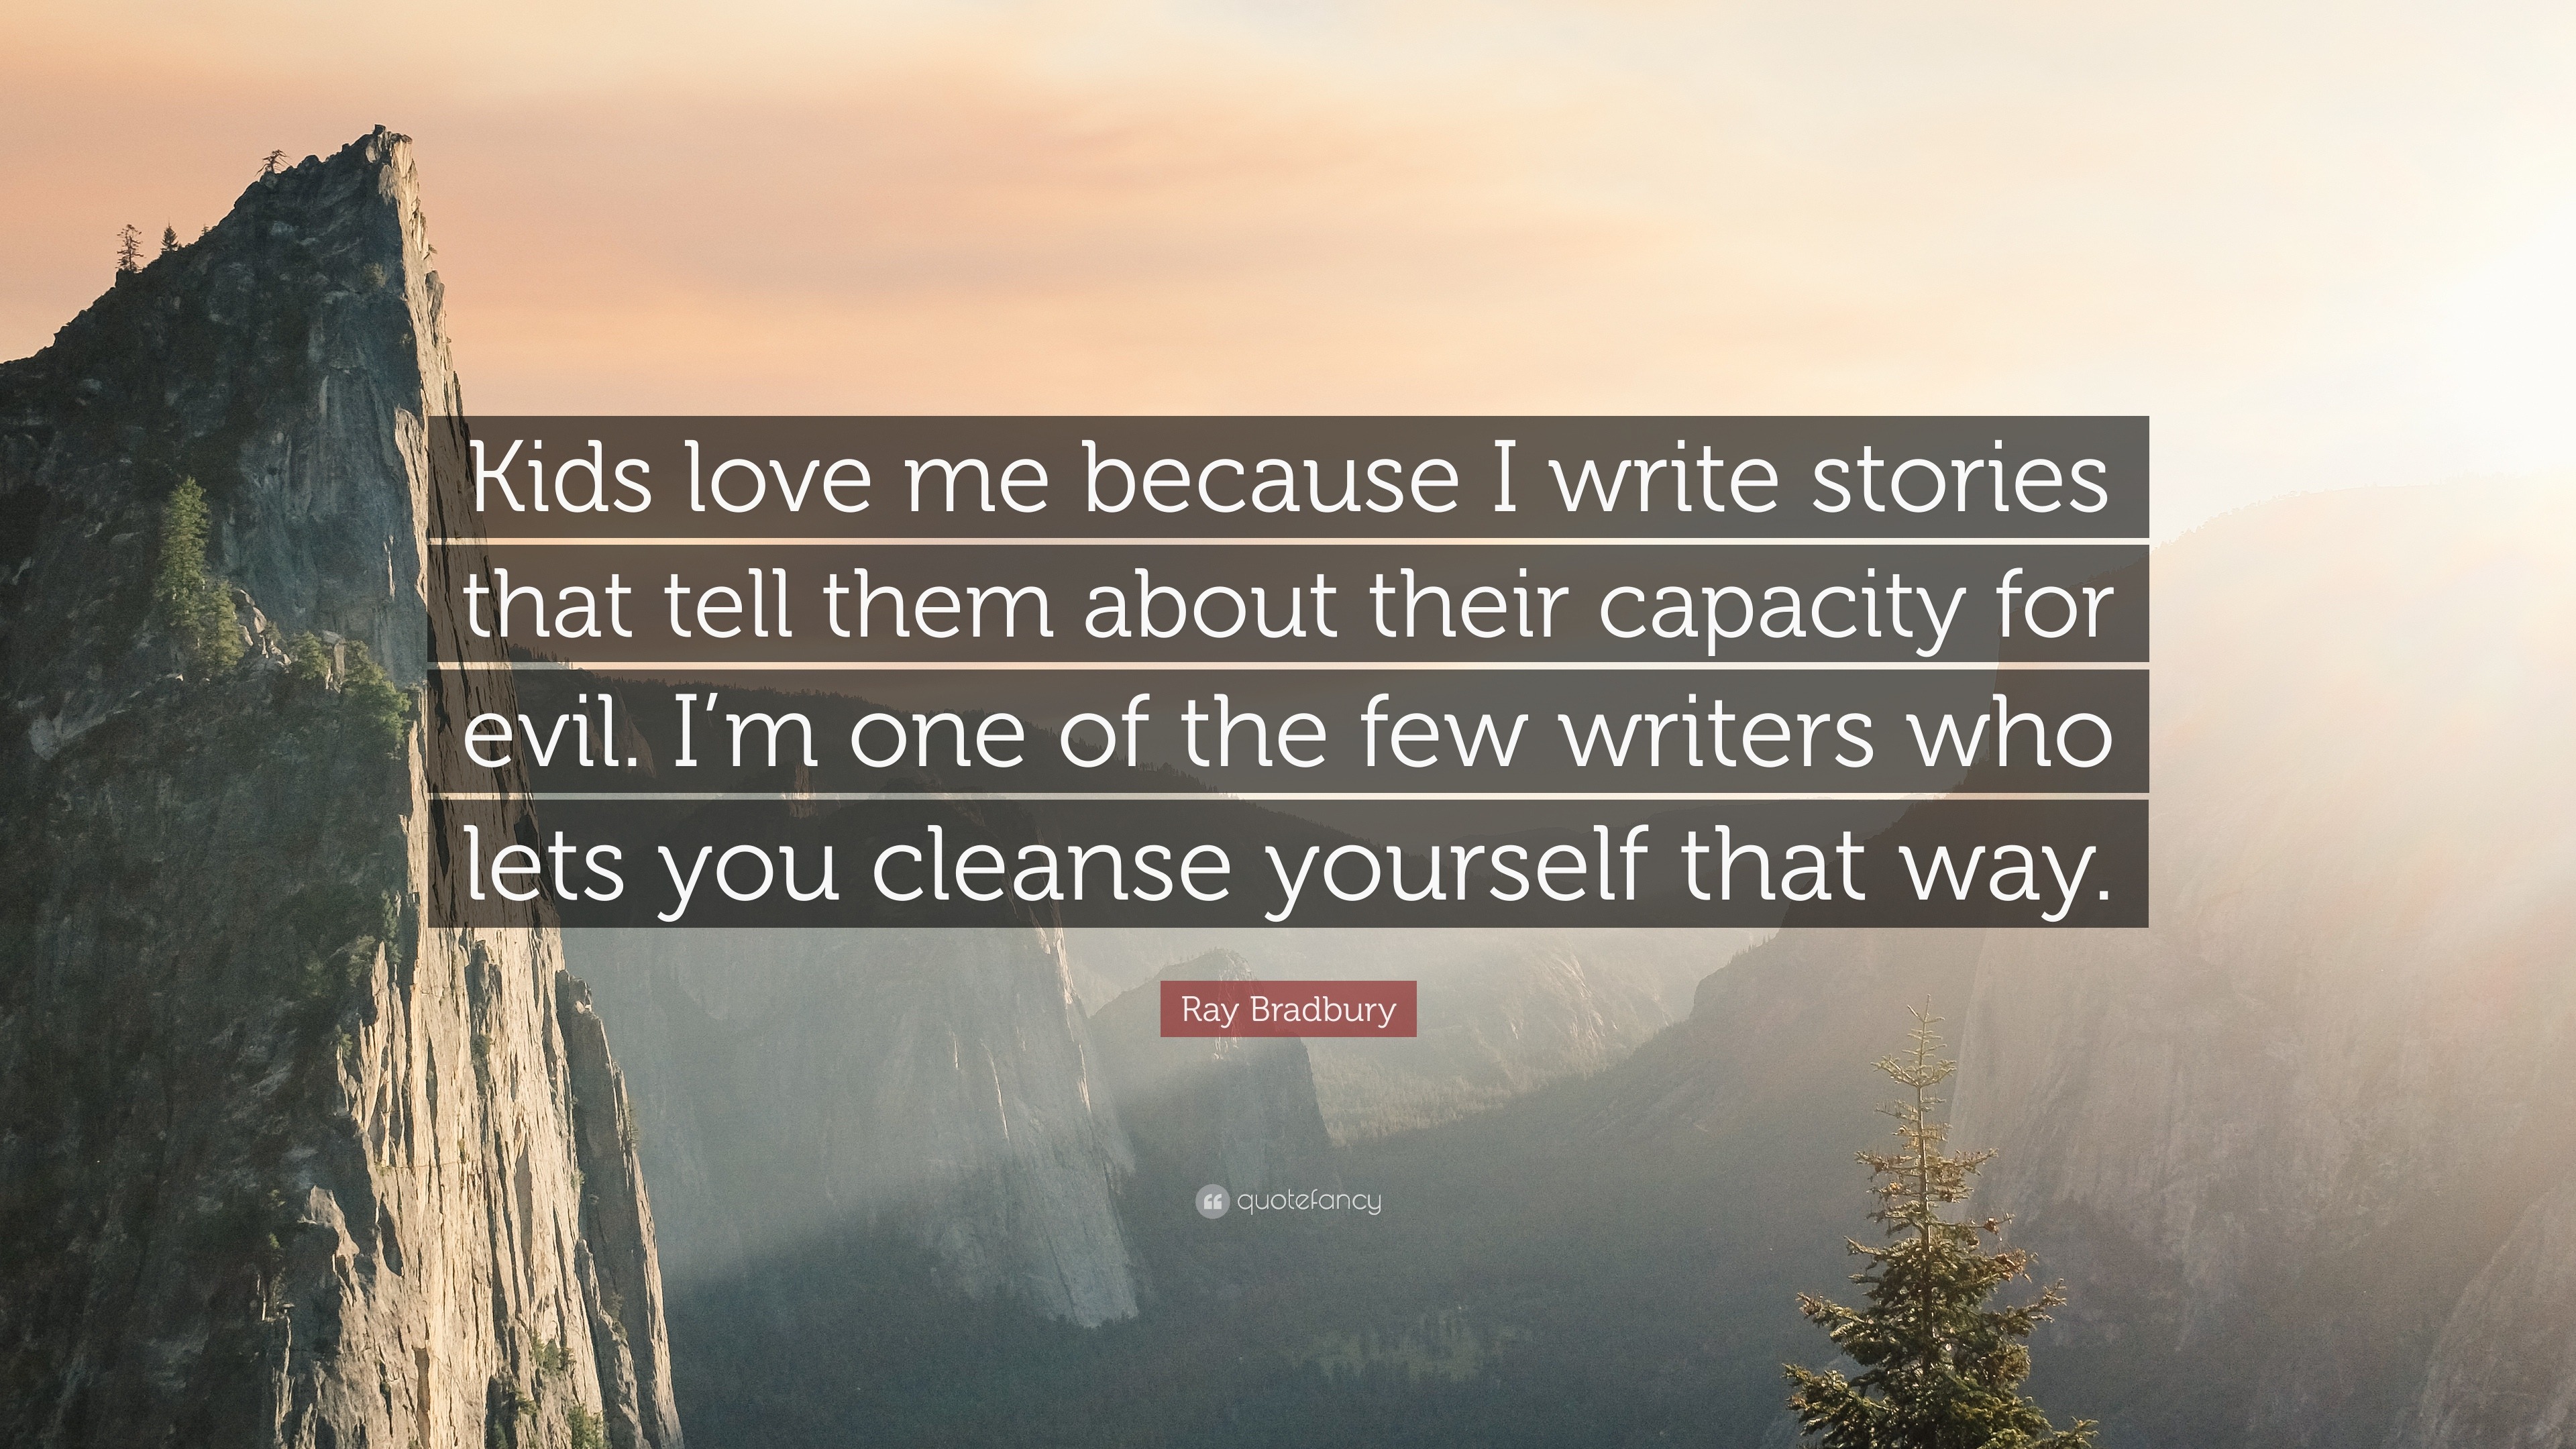 Ray Bradbury Quote “Kids love me because I write stories that tell them about